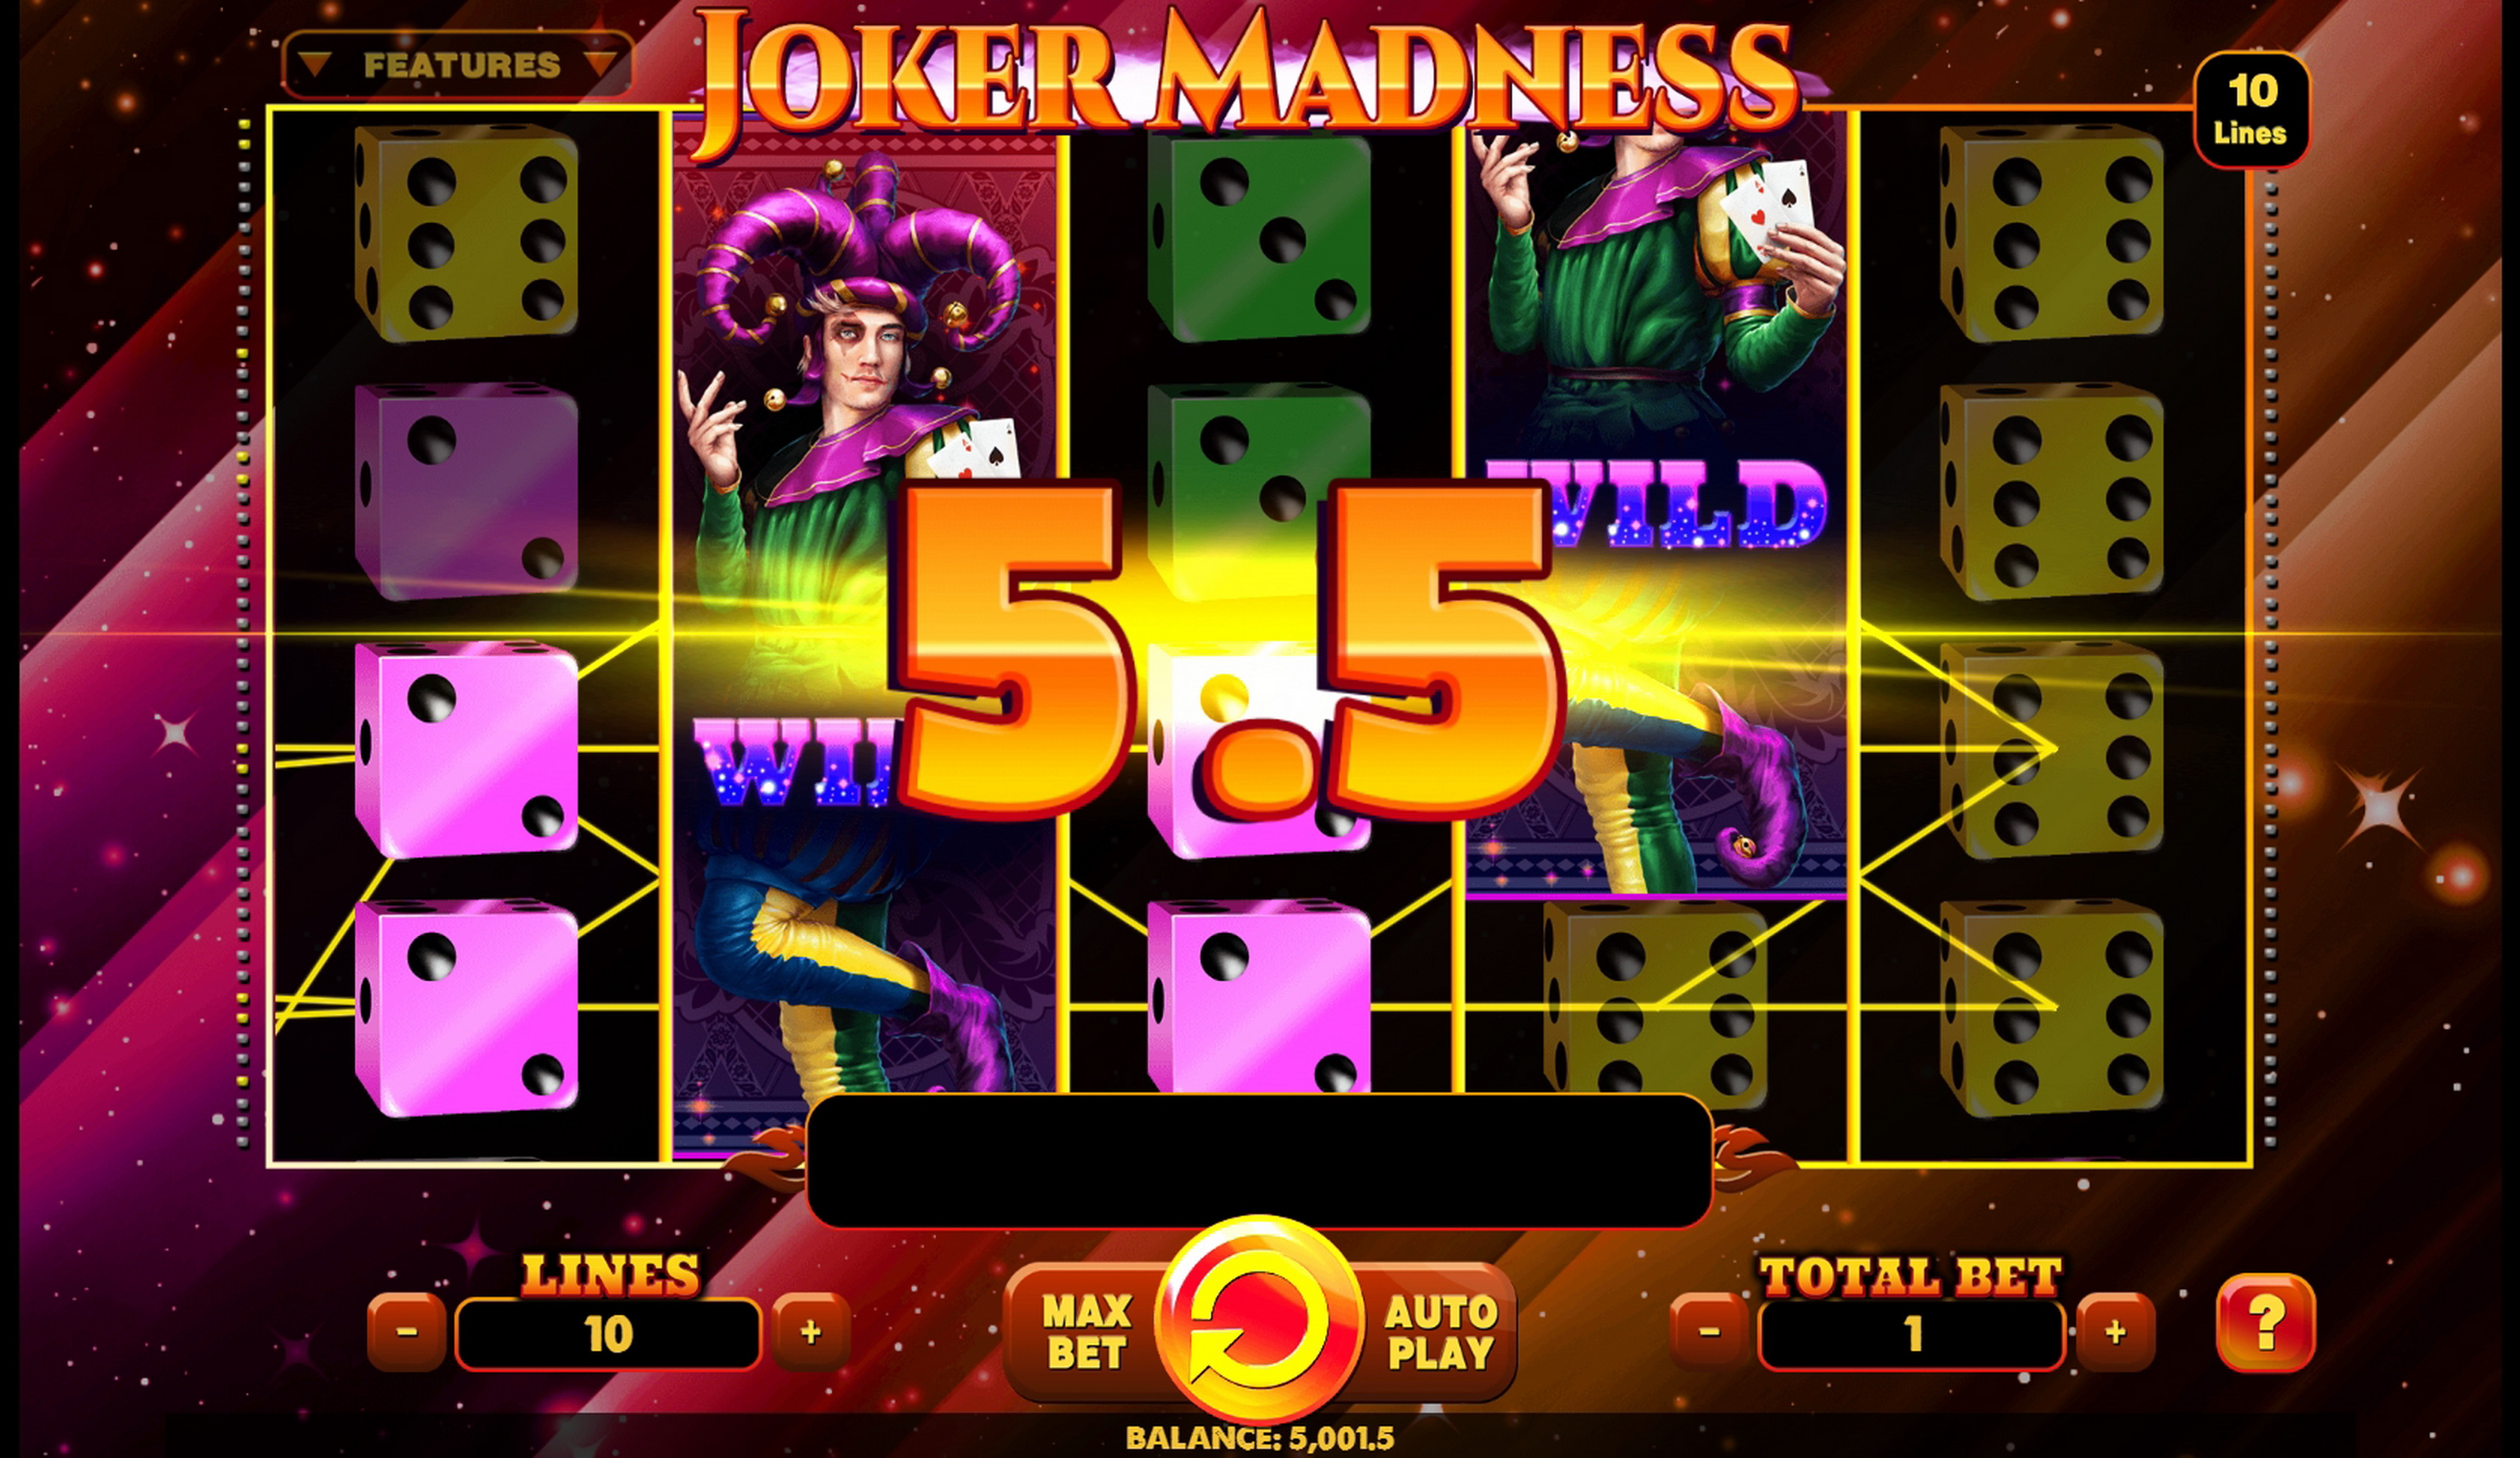 Win Money in Joker Madness Free Slot Game by Spinomenal